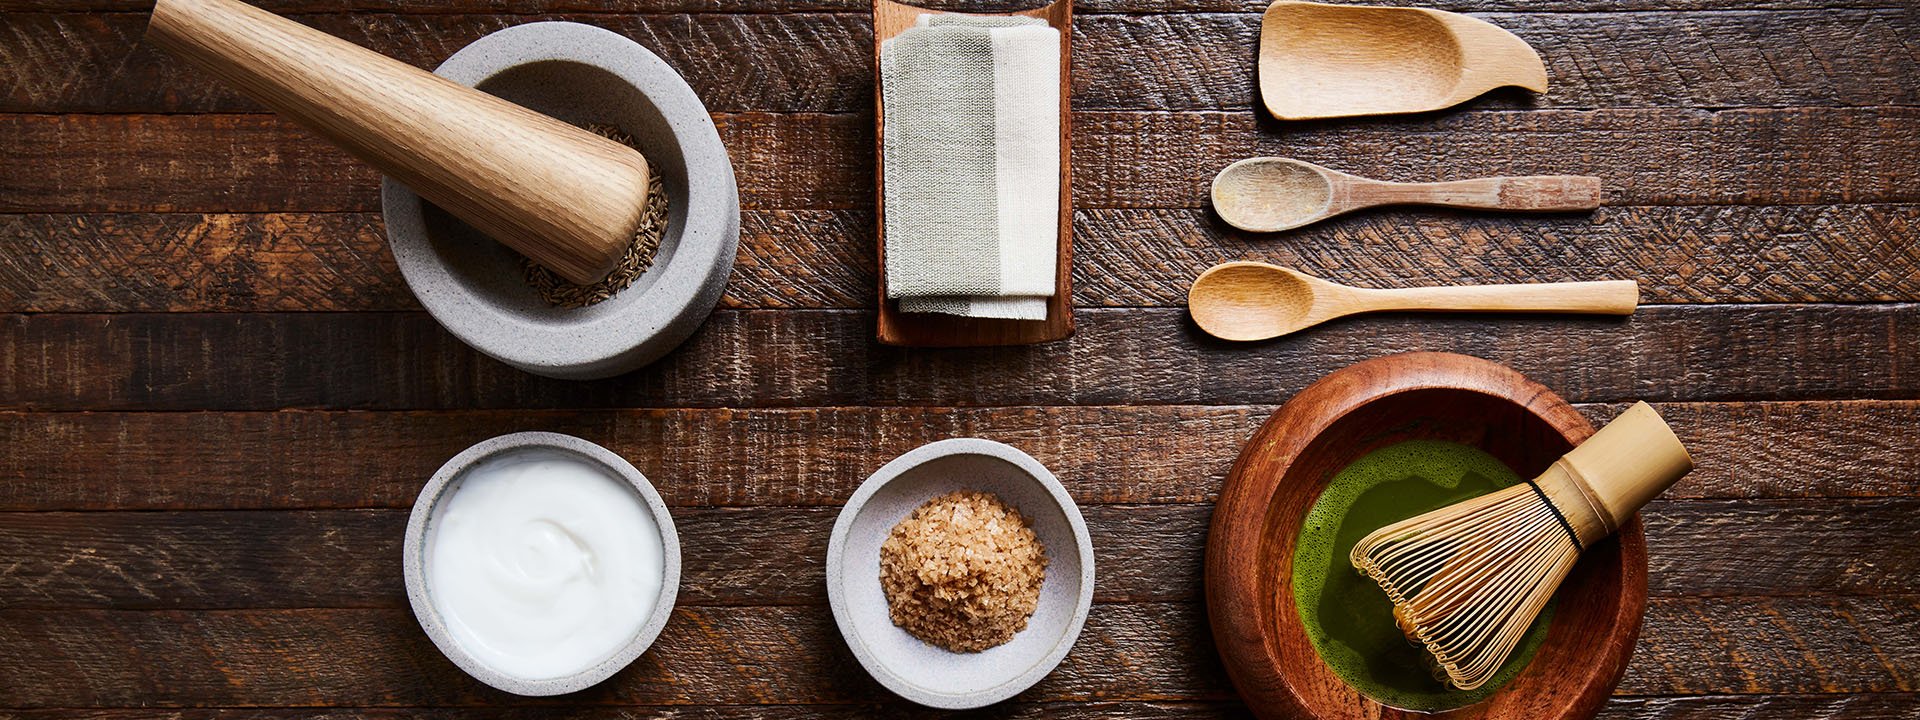 Bowls and plates on a wooden table filled with healing salts, spices, and creams used for spa treatments